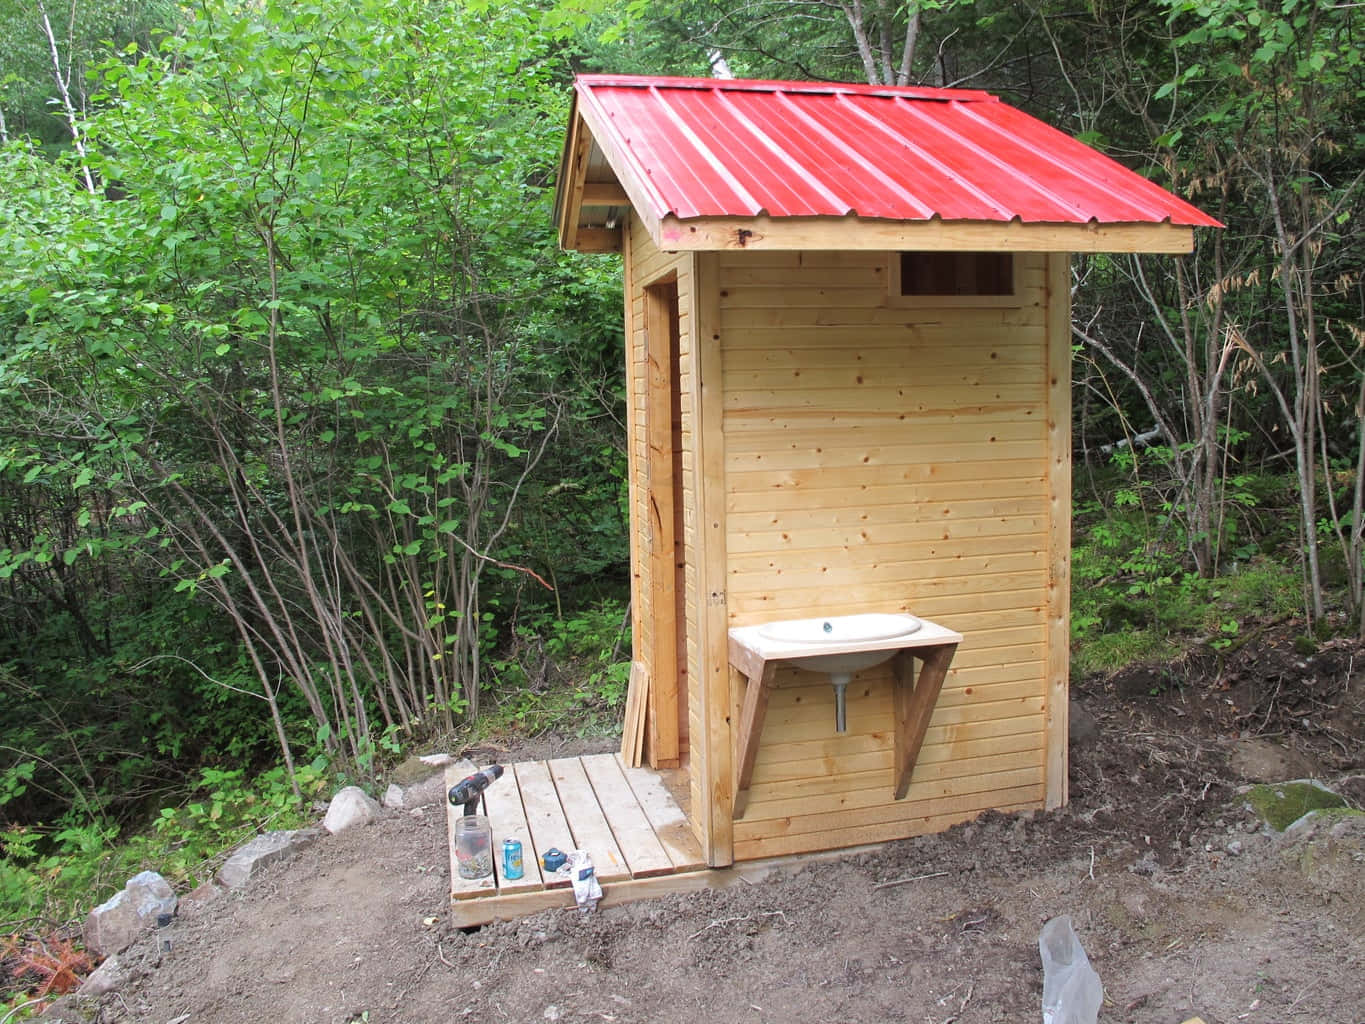 Out in The Open: An idyllic picture of a white Outhouse